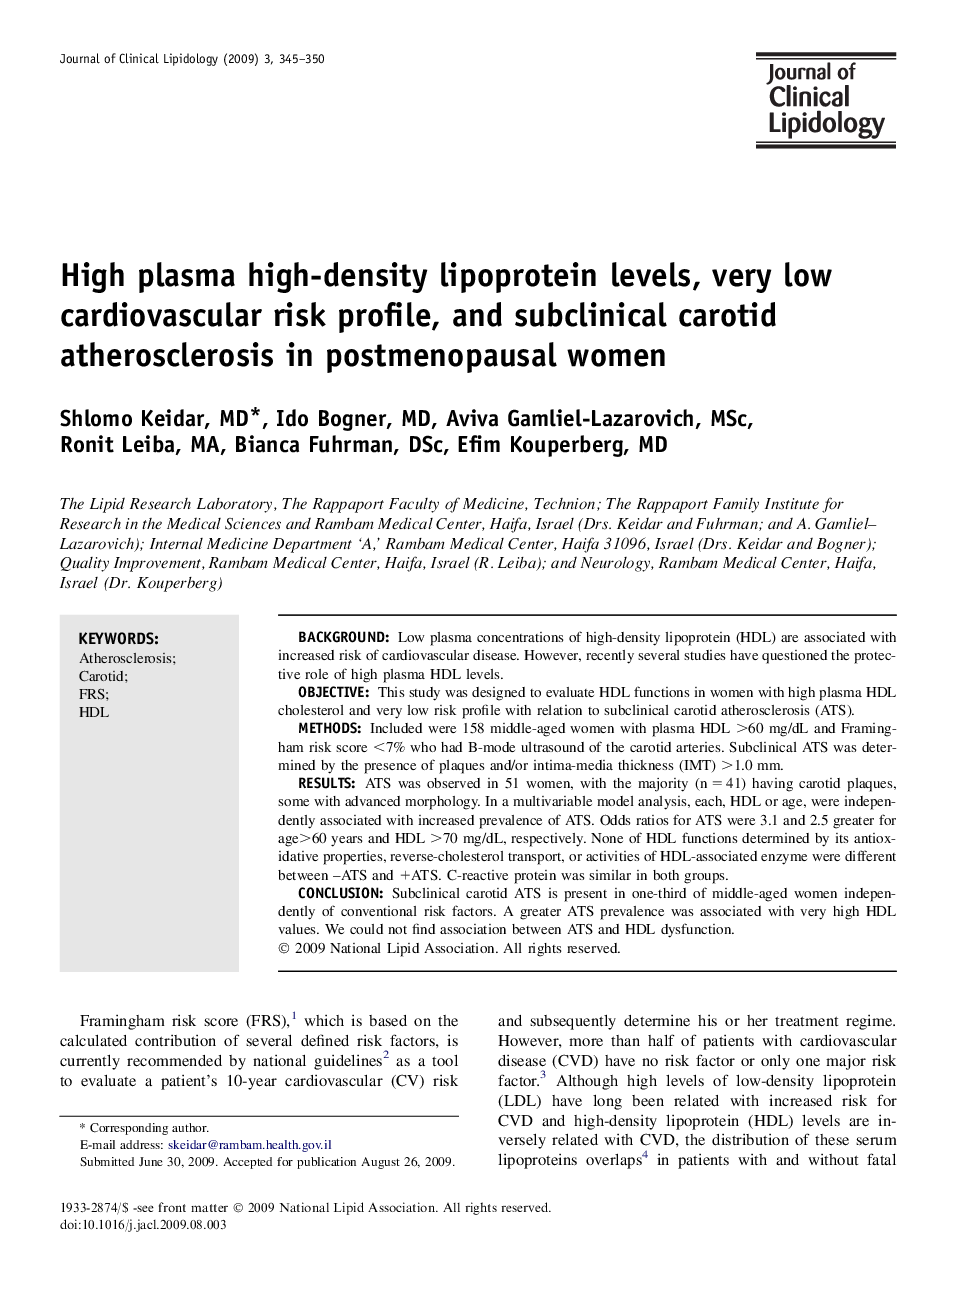 High plasma high-density lipoprotein levels, very low cardiovascular risk profile, and subclinical carotid atherosclerosis in postmenopausal women